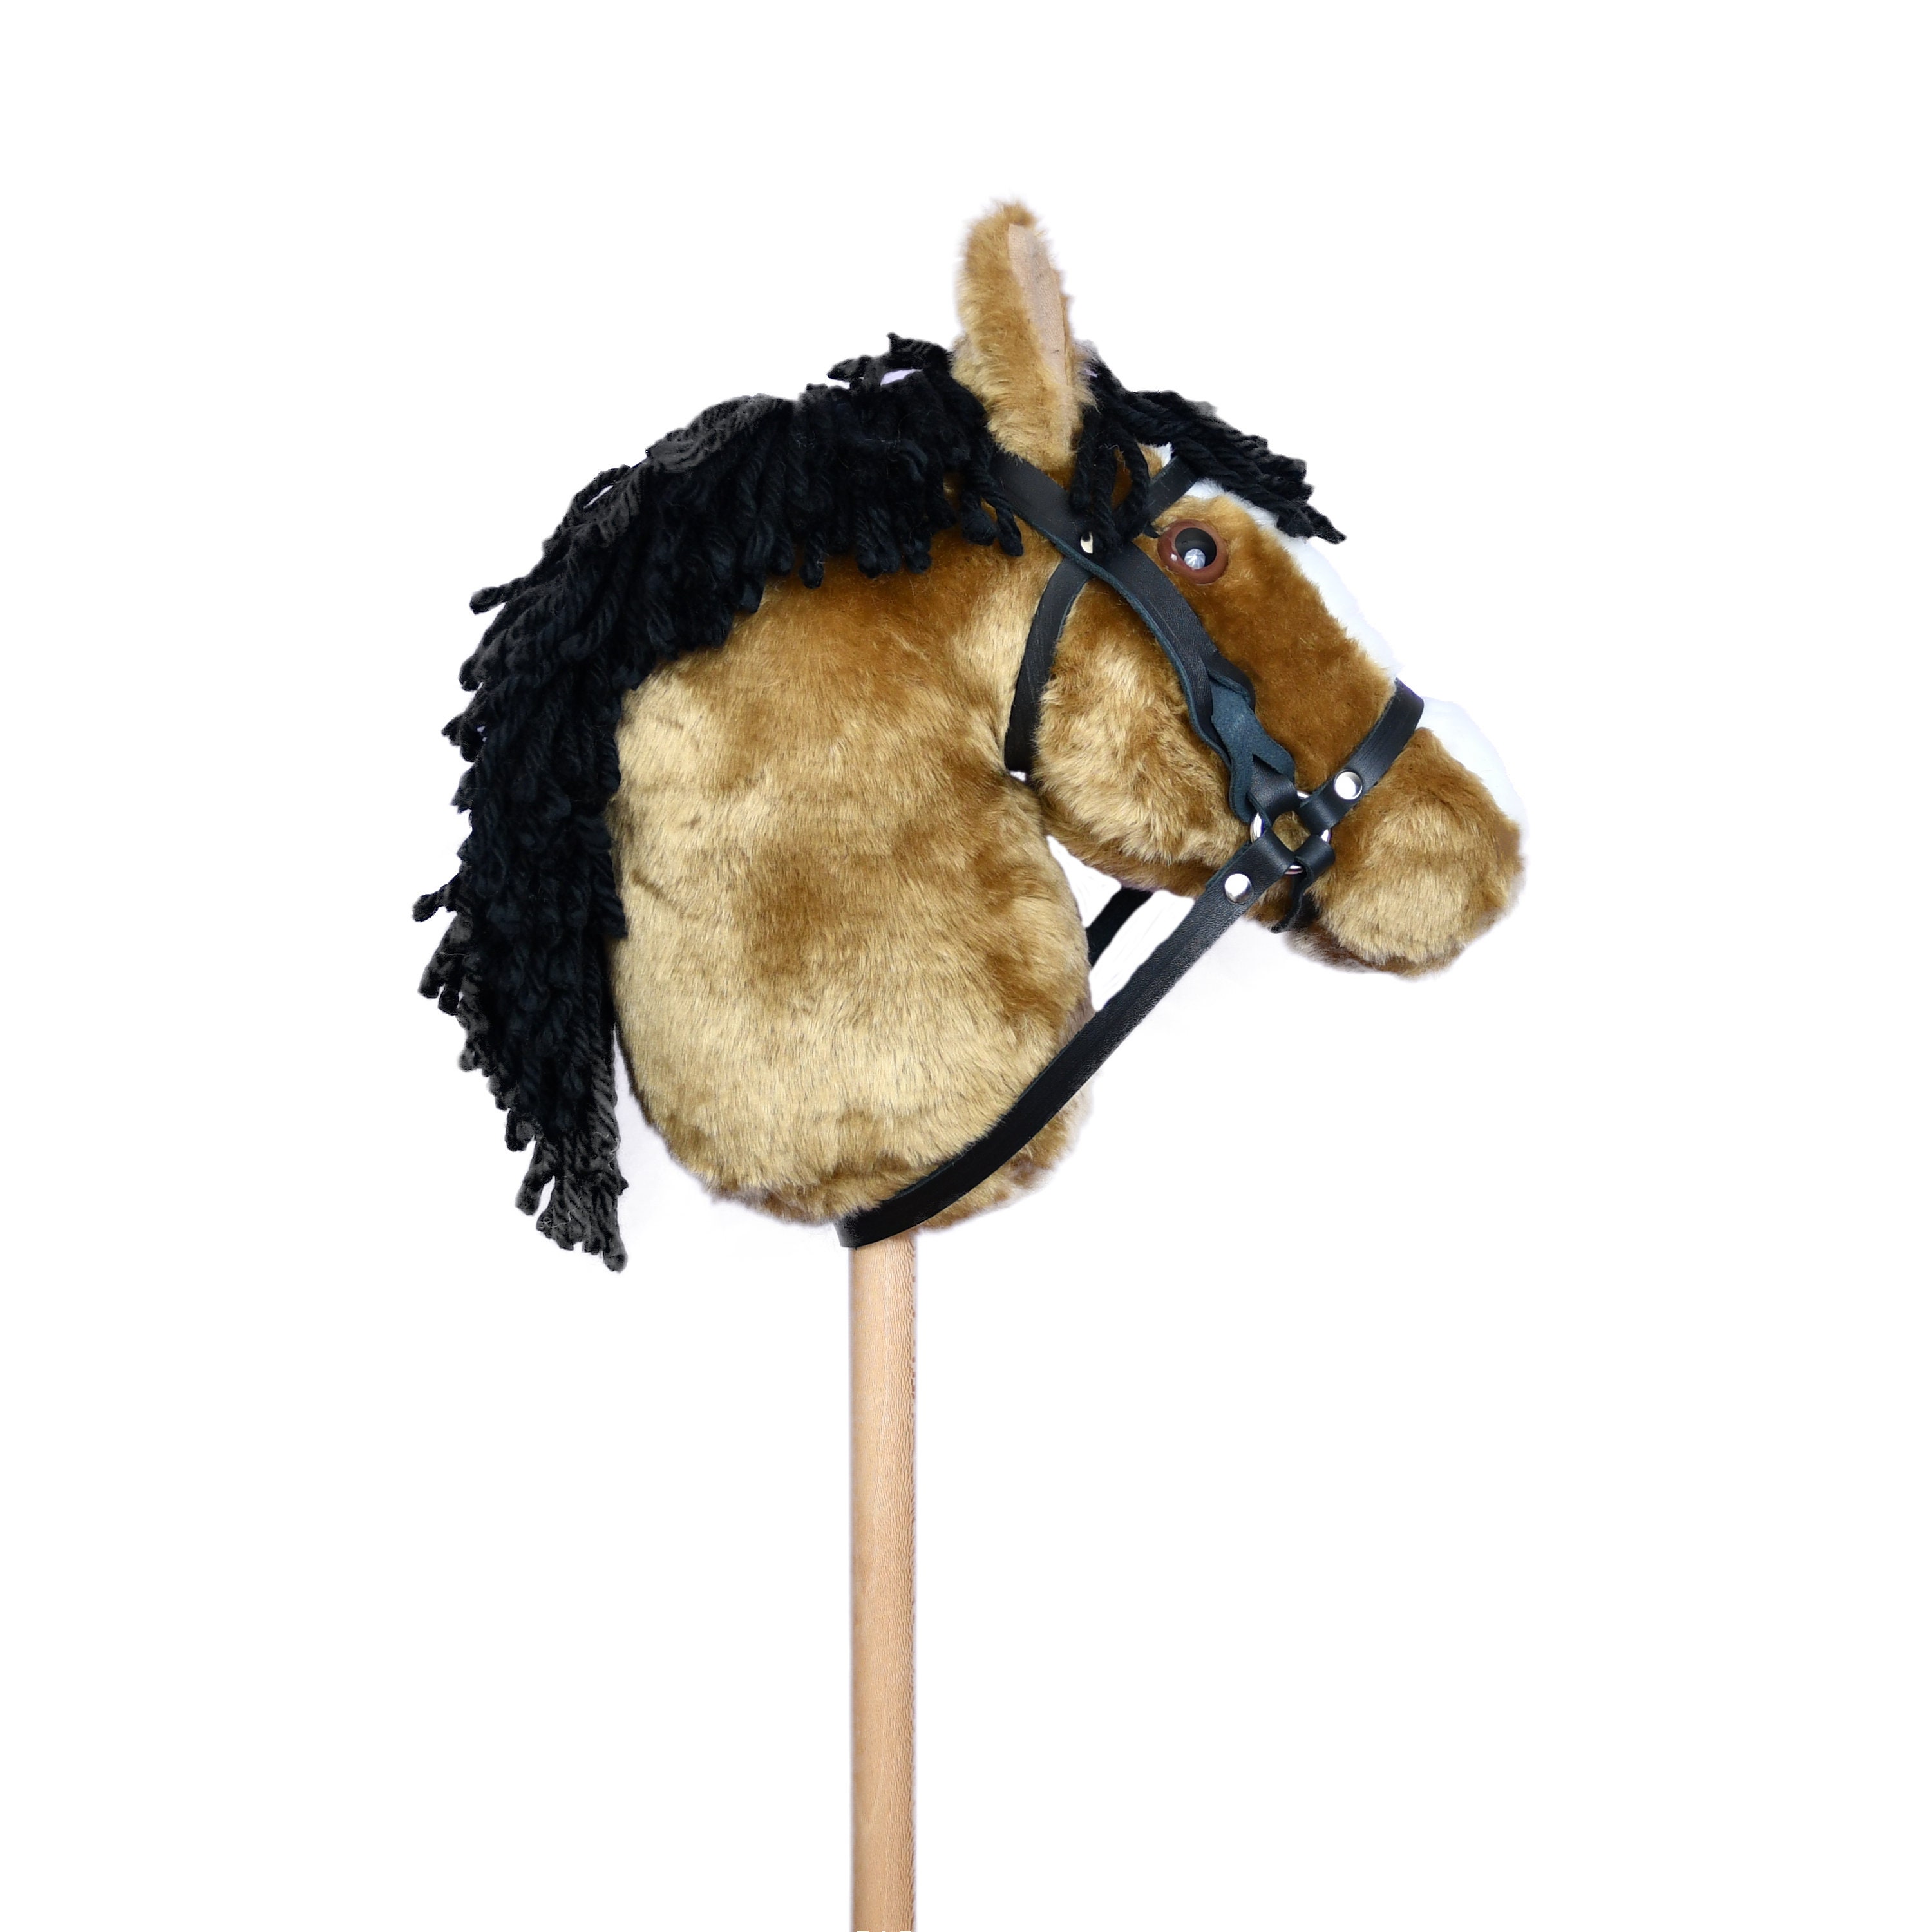 Best Deal for Snowy Mountain Ponies - Hobby Horsing Stick Horse Pony (Bay)